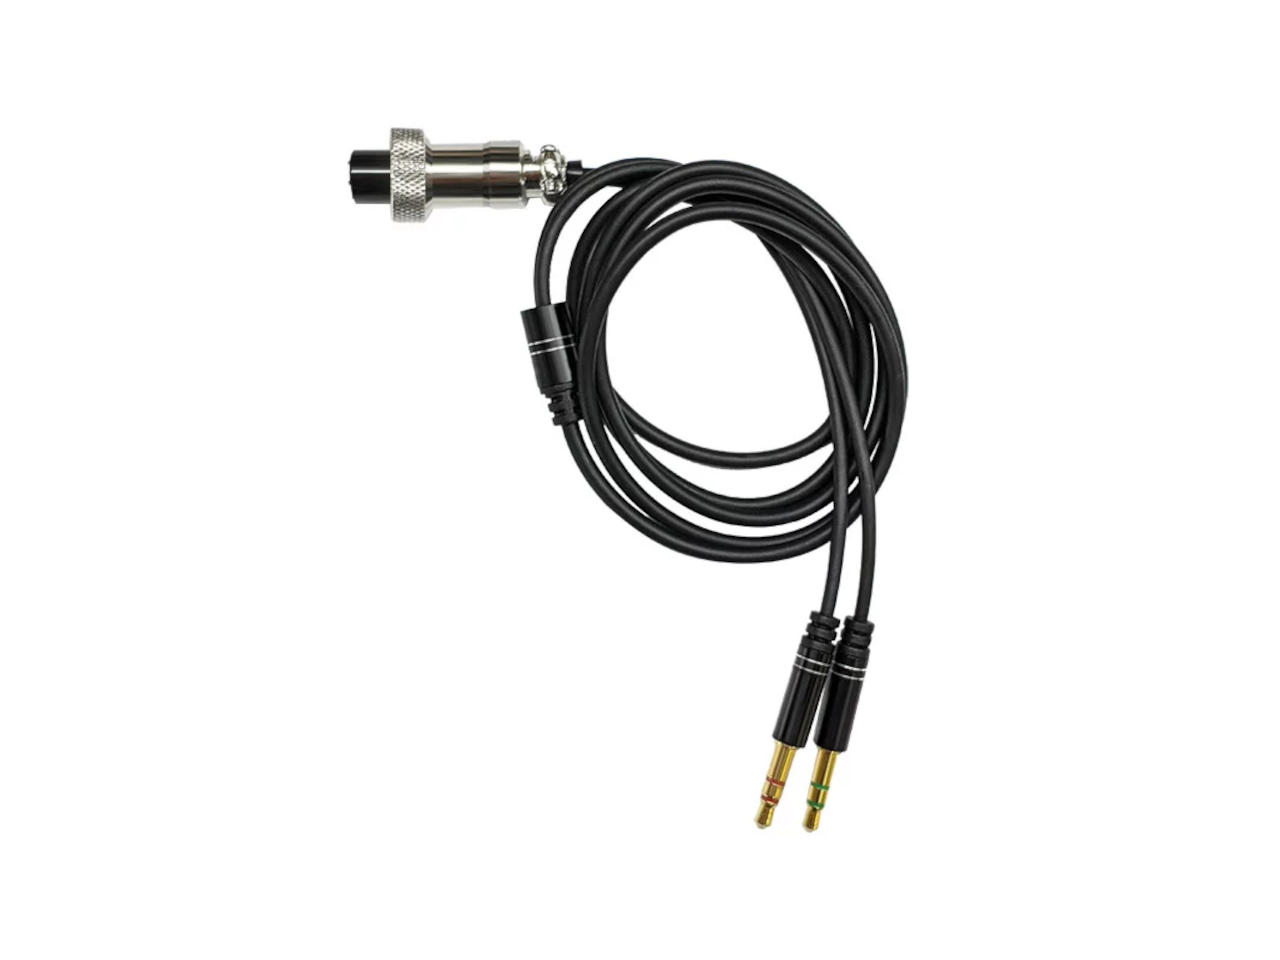 LAB599 GX12-7 AUDIO CABLE